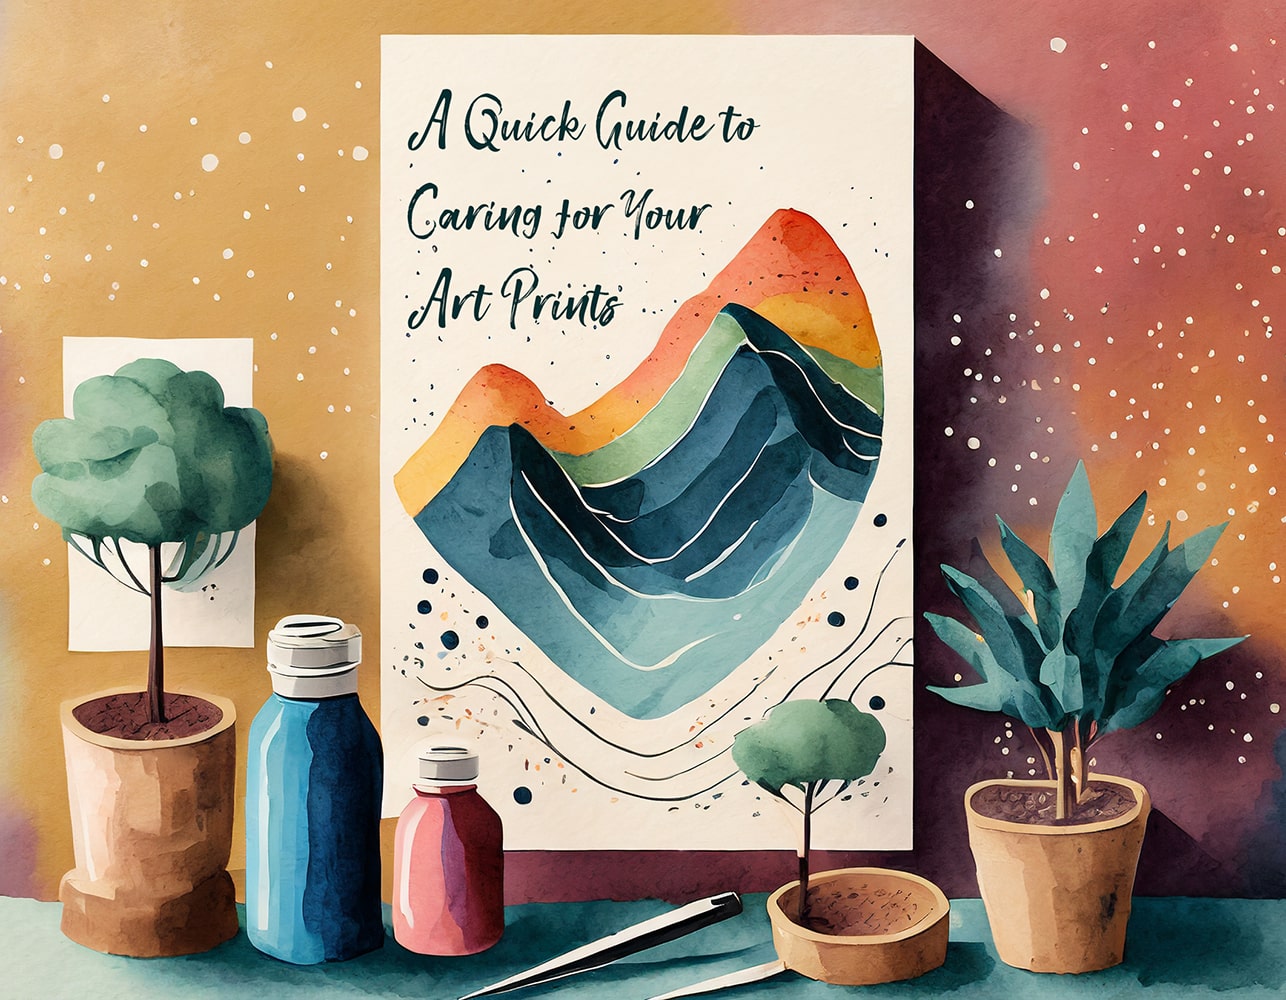 A quick care guide for art prints